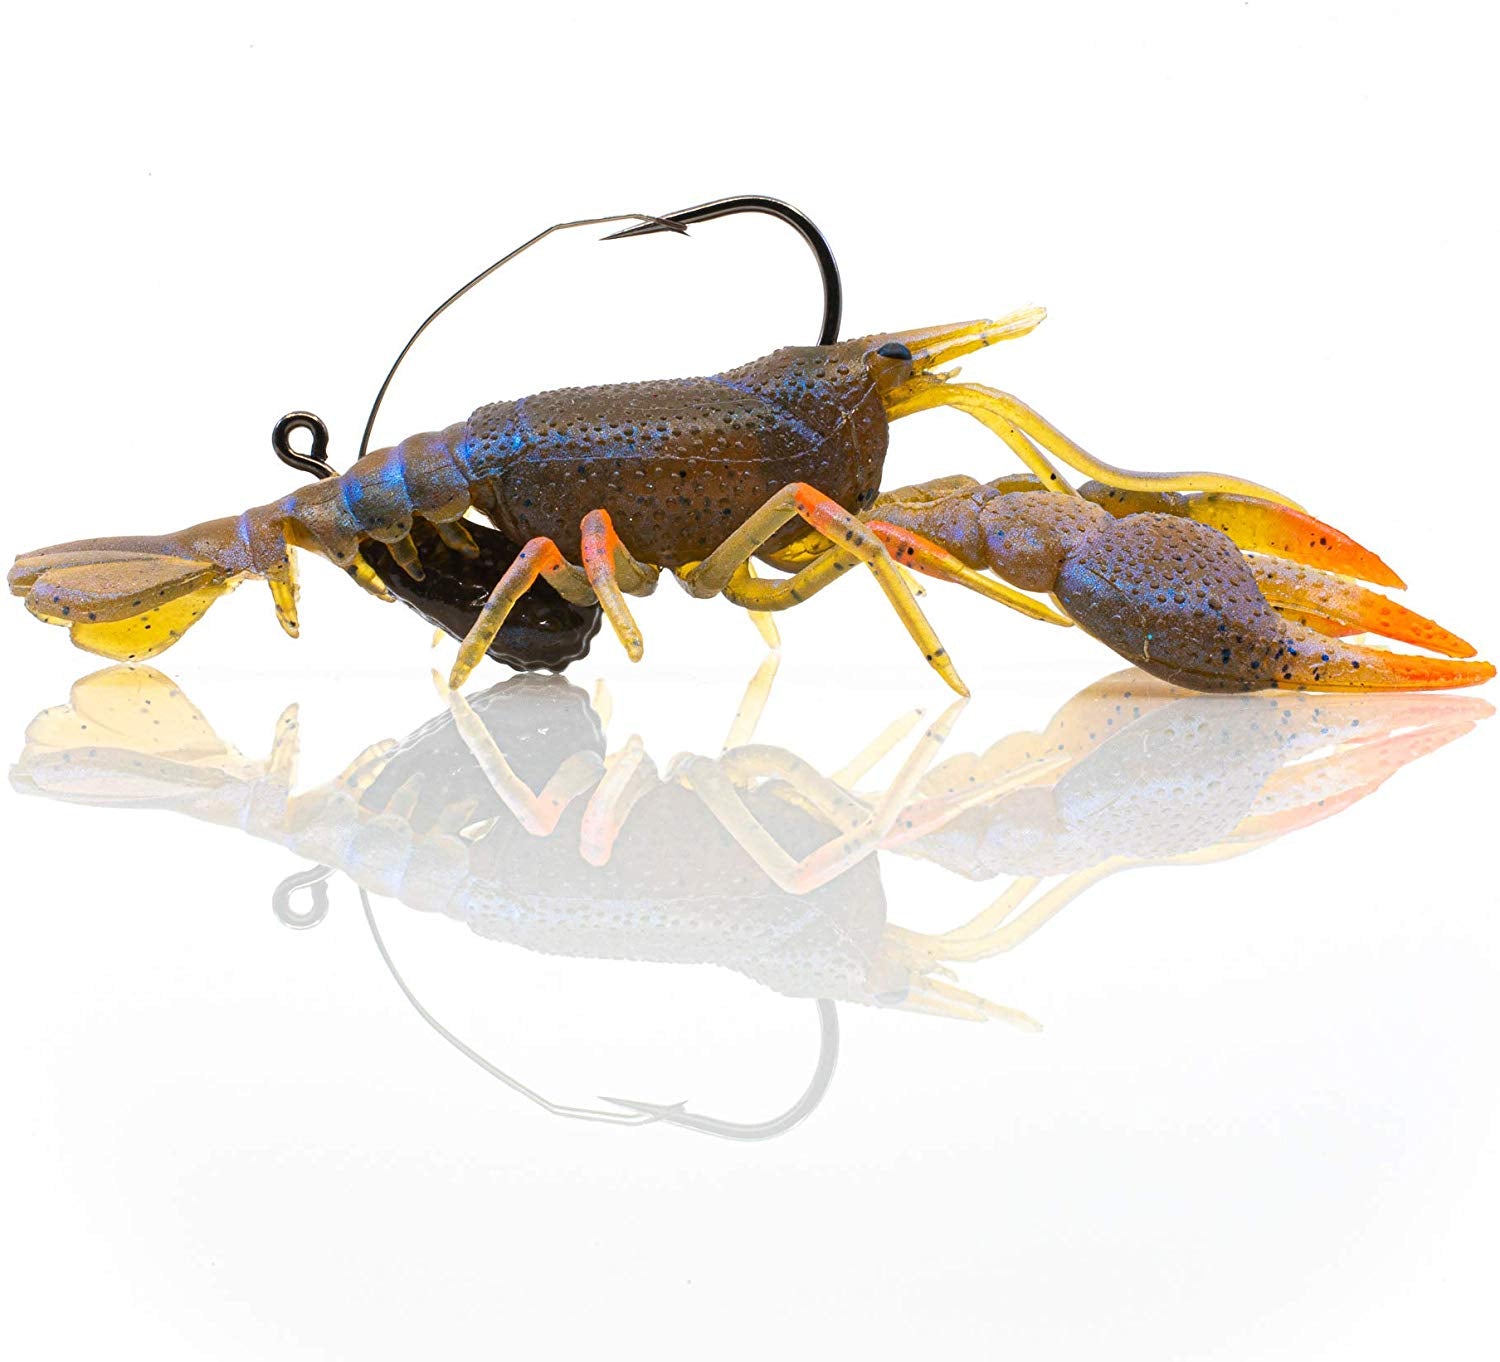 The Mud Bug Lure - This Crazy Looking Crustacean Catches Fish